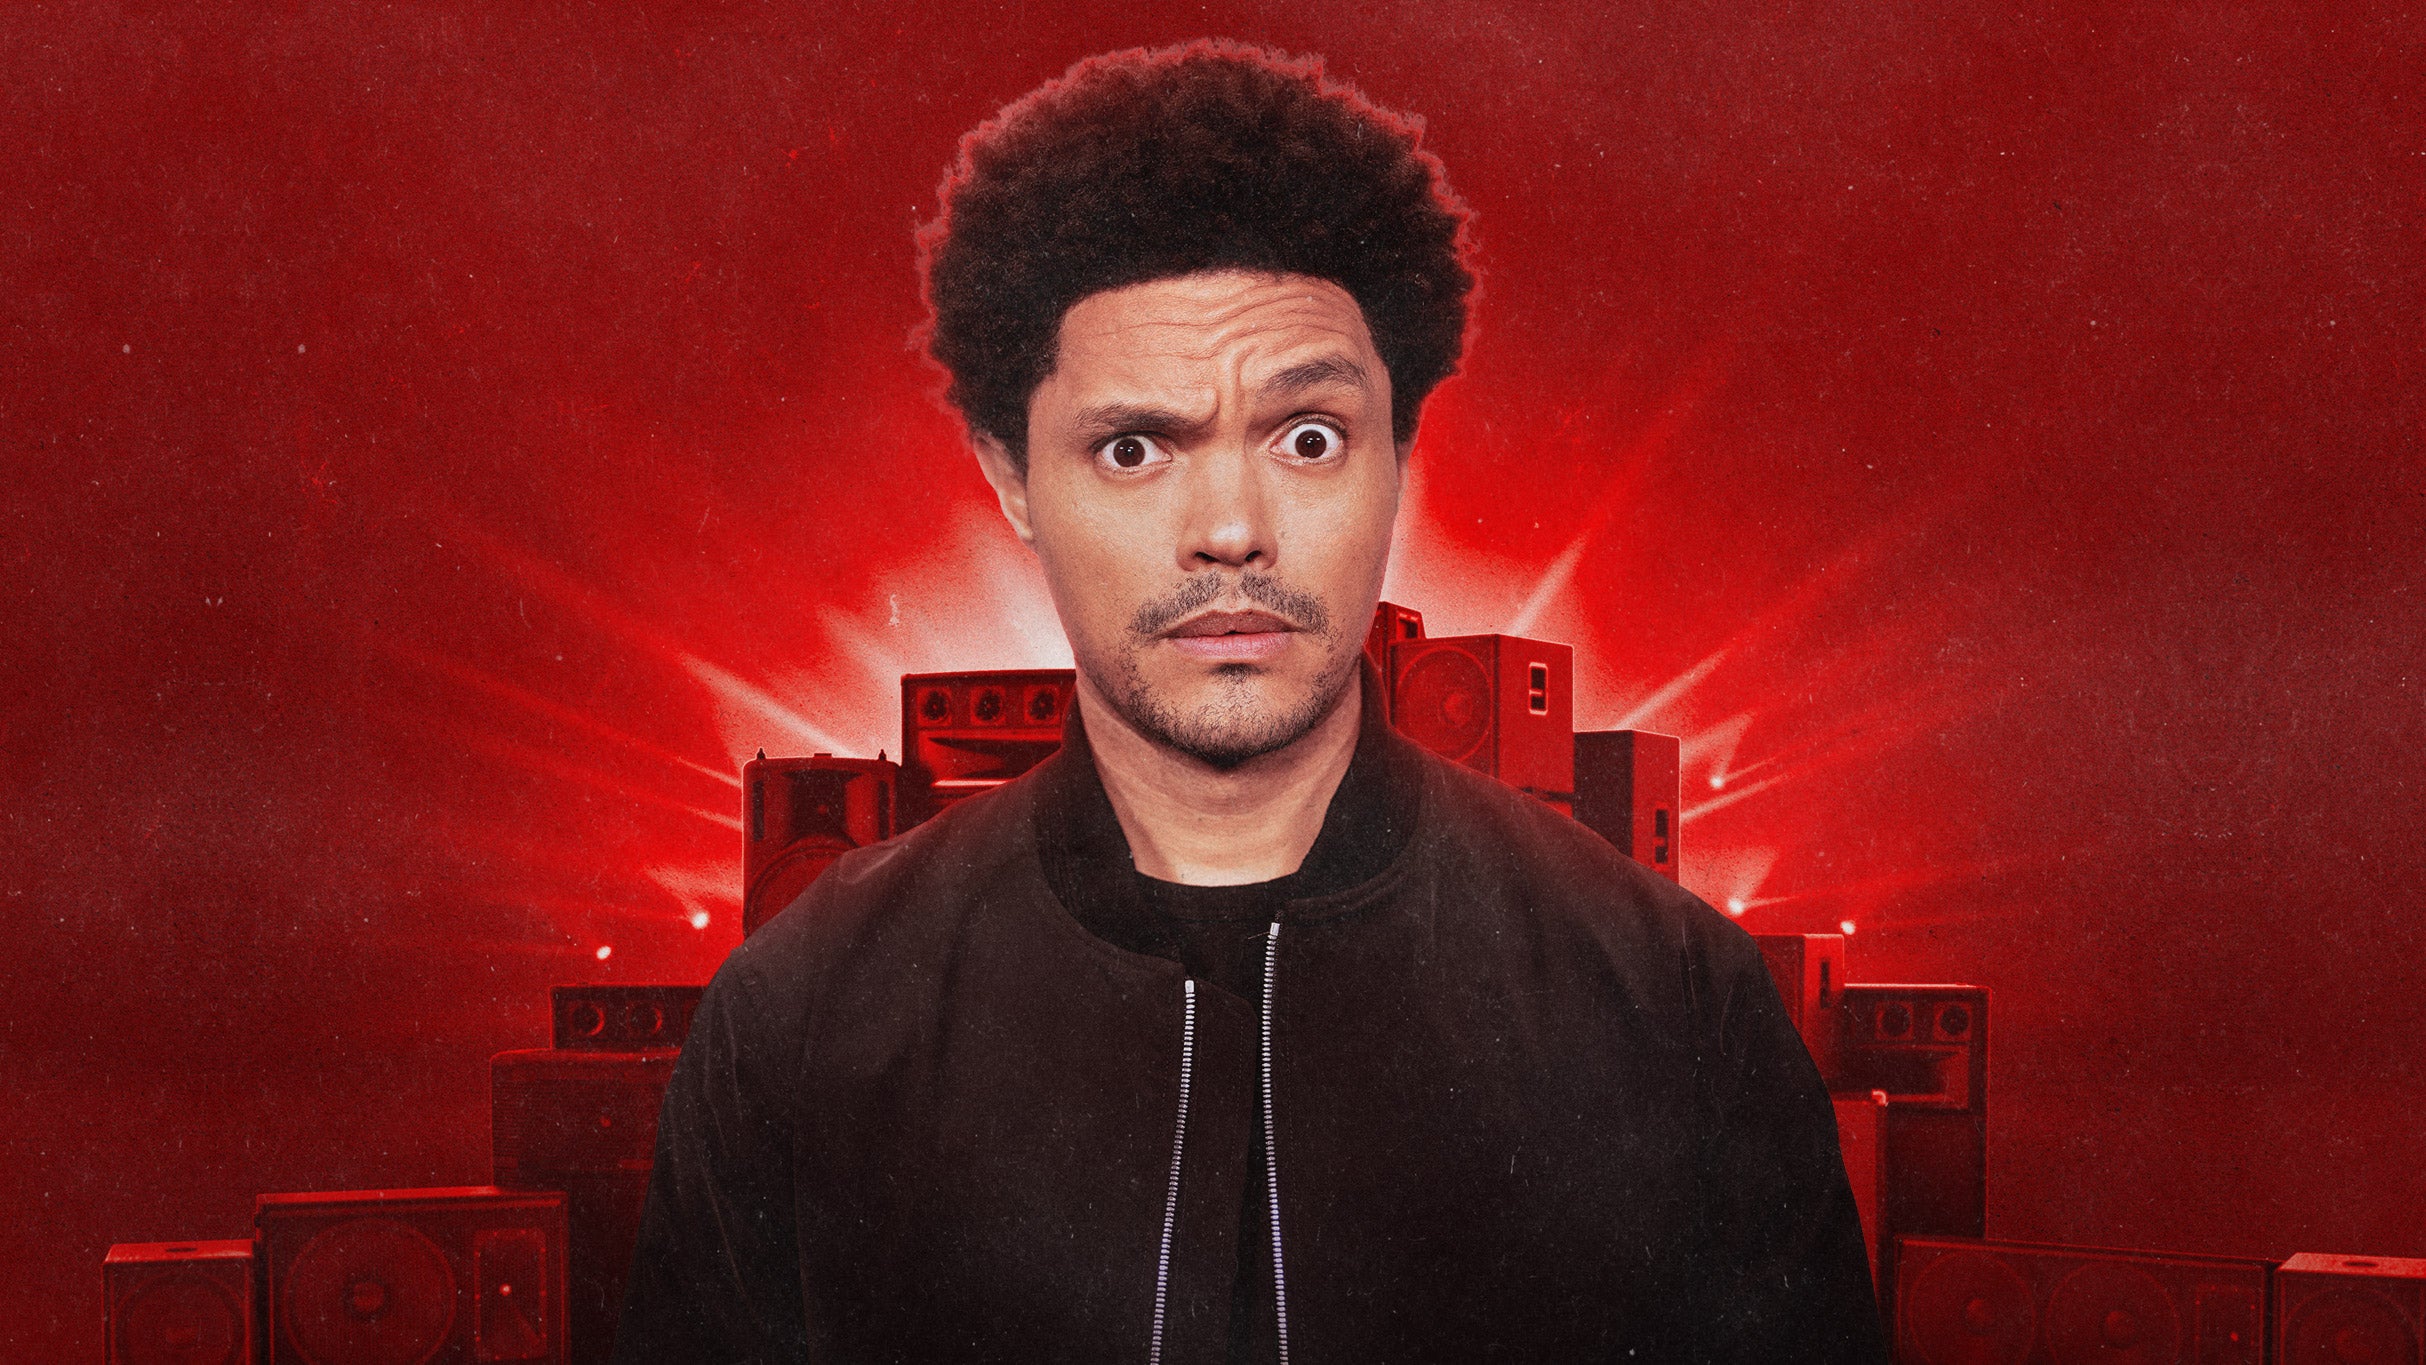 Trevor Noah: Off The Record free presale password for early tickets in San Diego